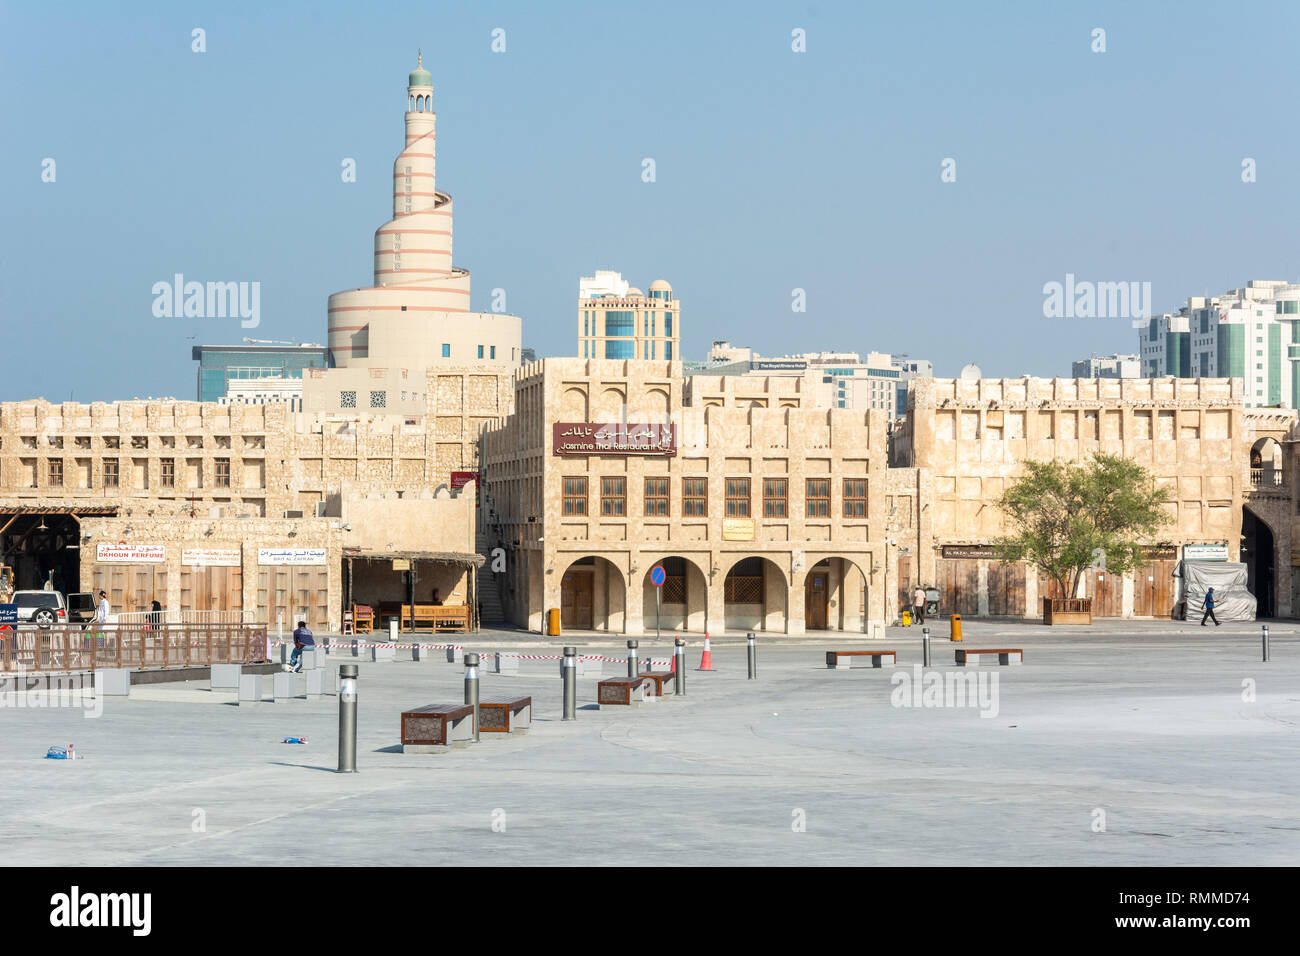 Doha, Qatar - November 3, 2016. View of public square in Doha with Bin Zaid Al Mahmoud Islamic Cultural Center (Fanar), modern residential and commerc Stock Photo